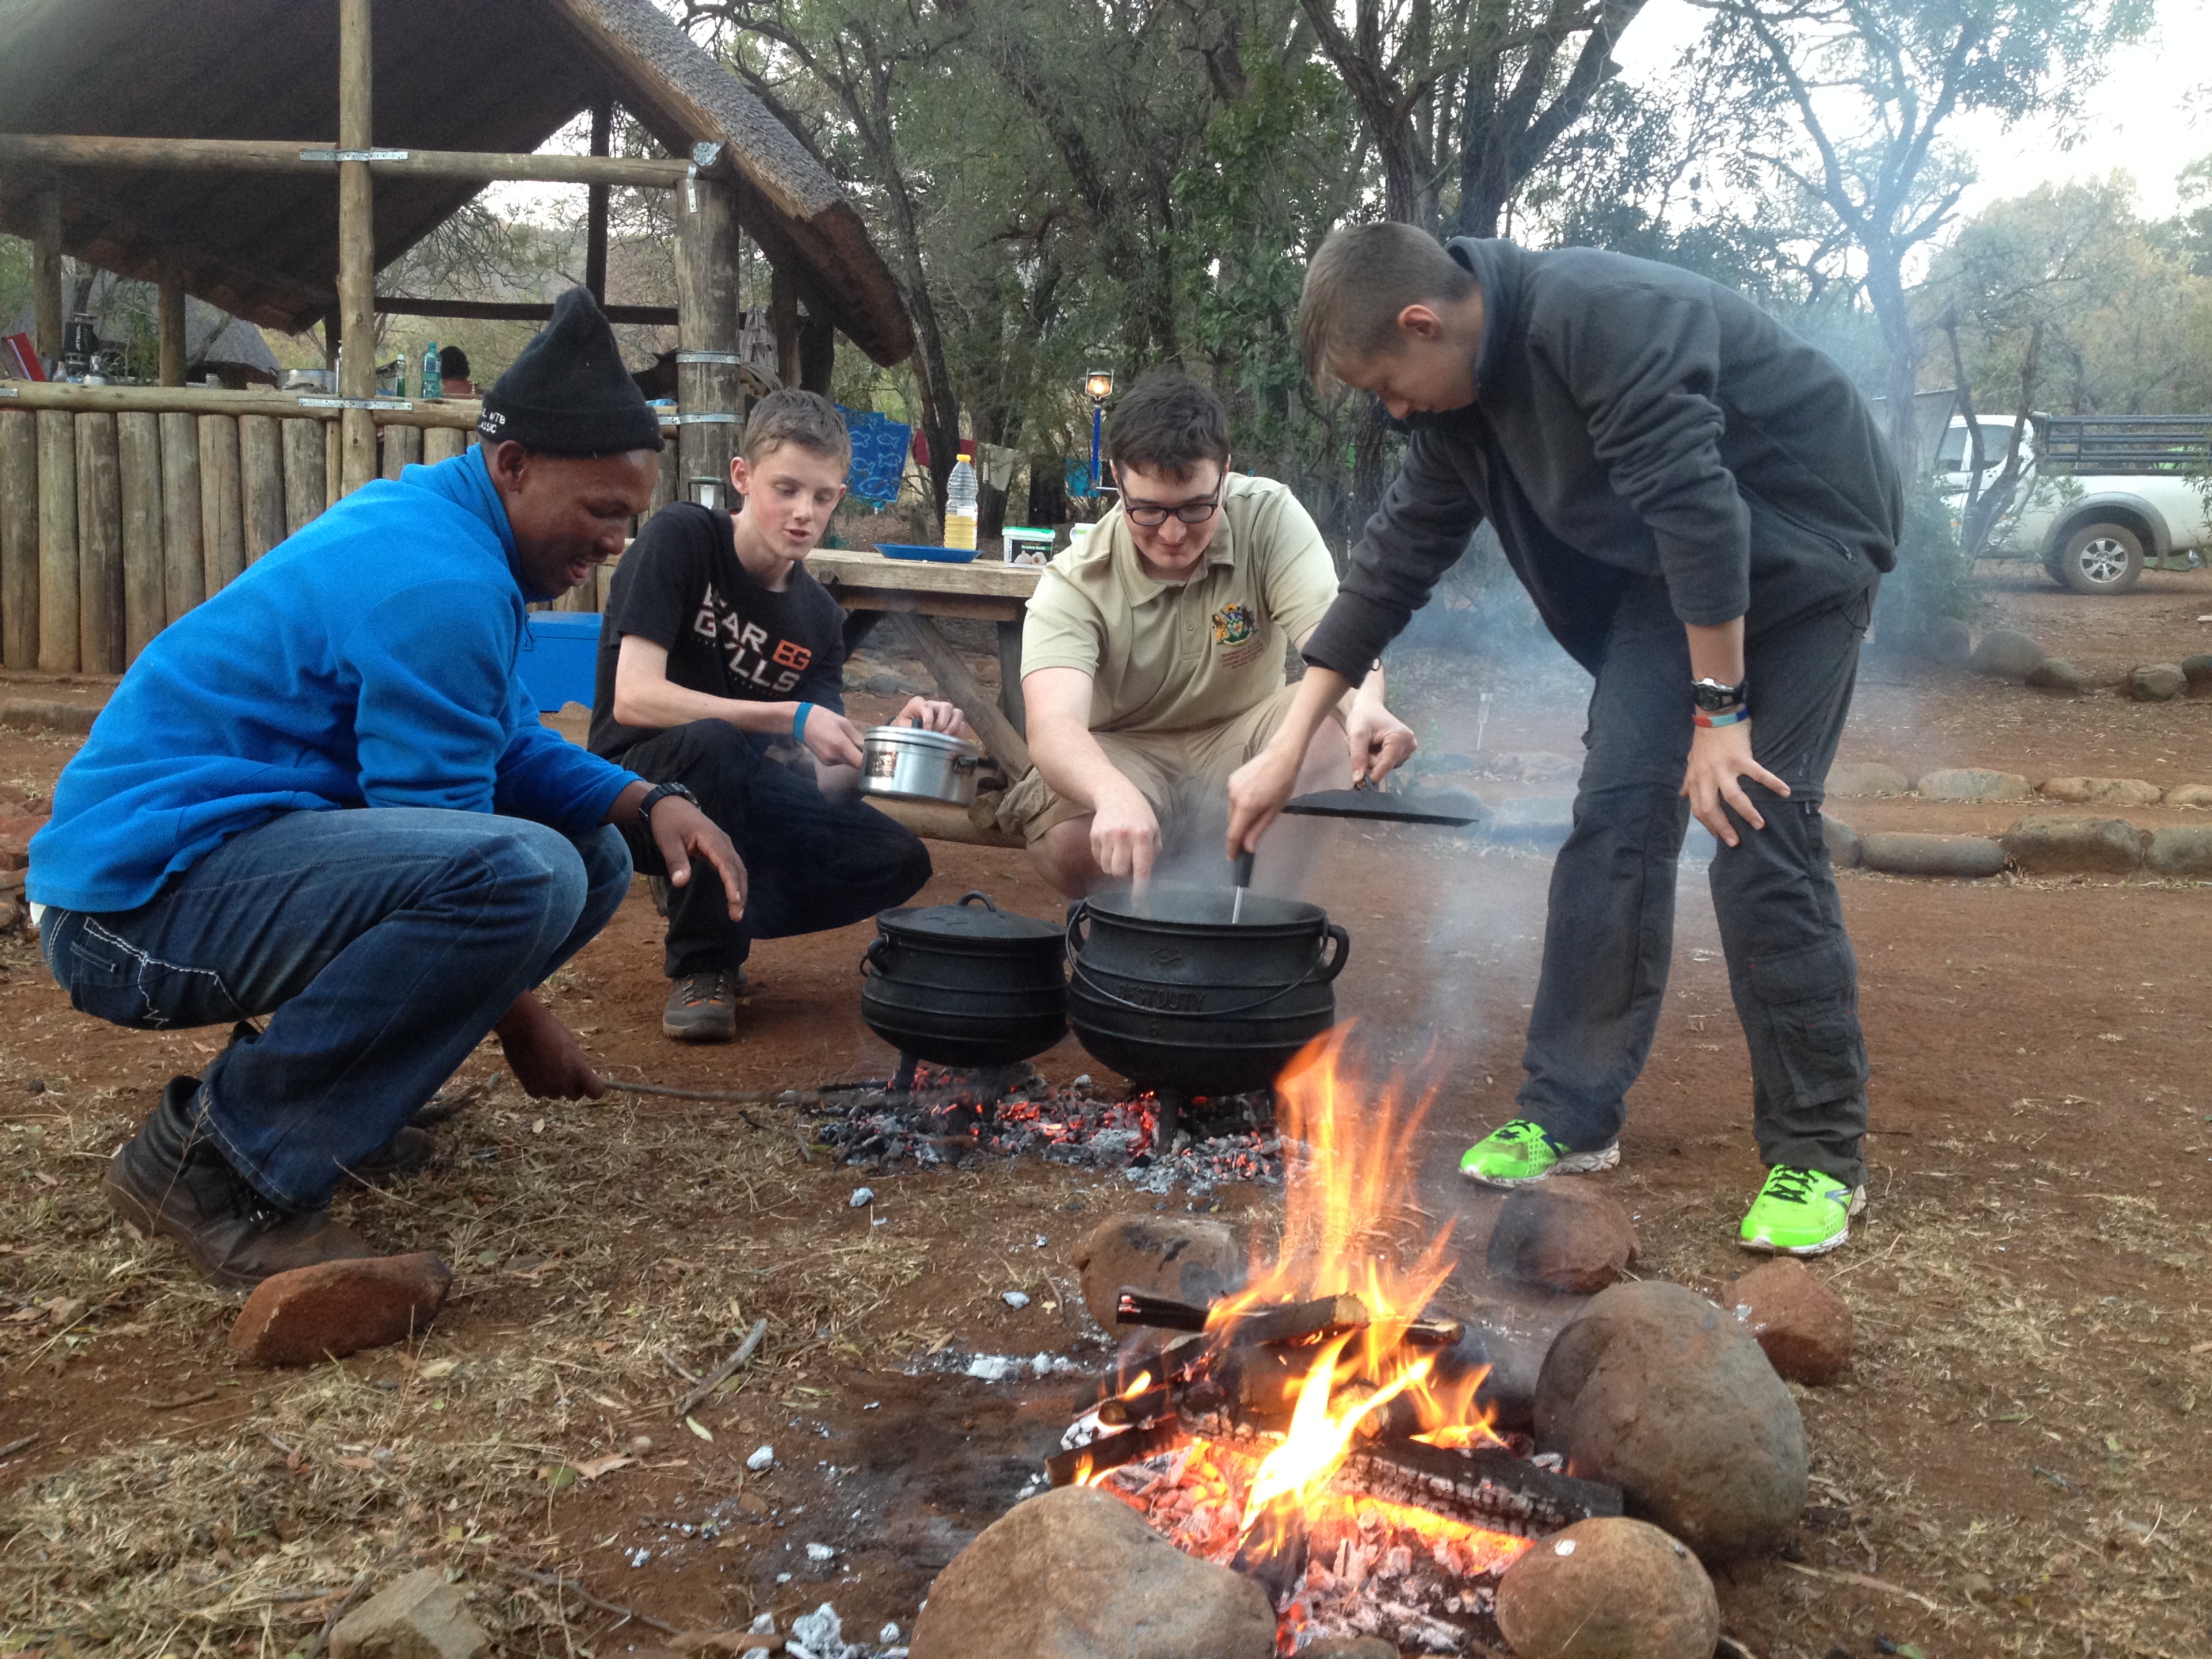 Kieran Walker, Todd Cross-Watson and Liam Holland-Bunch prepare a Potjie for the group’s evening meal